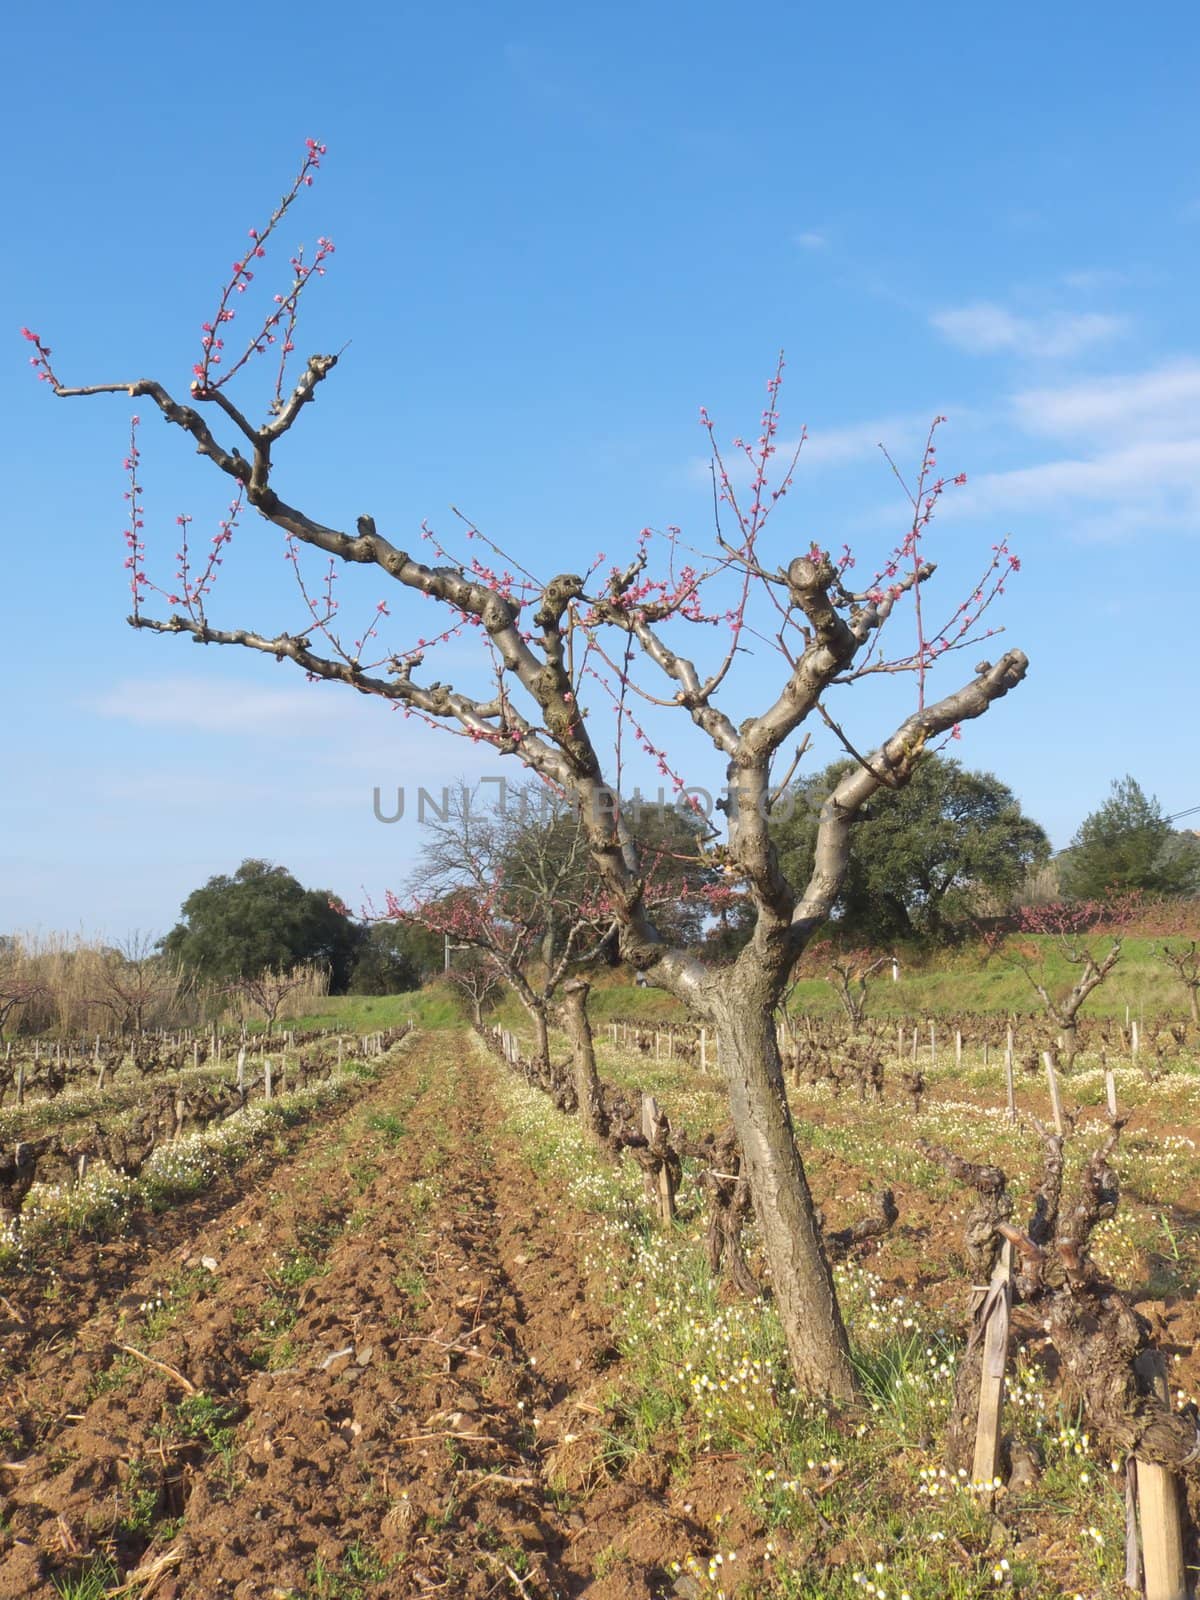 digital image of a peach tree in a field at spring